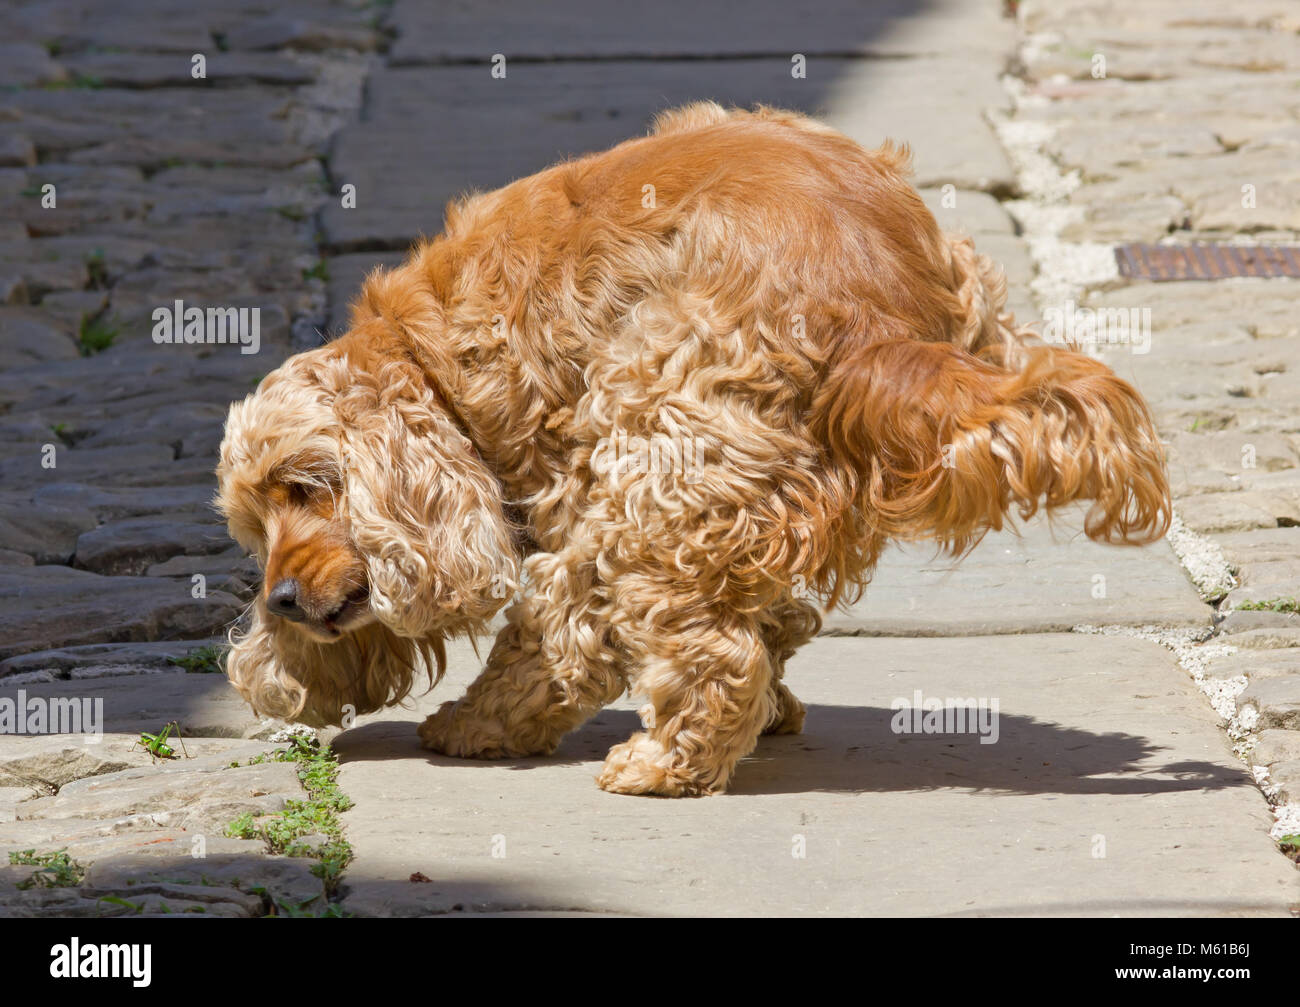 Curly Haired Dog High Resolution Stock Photography And Images Alamy